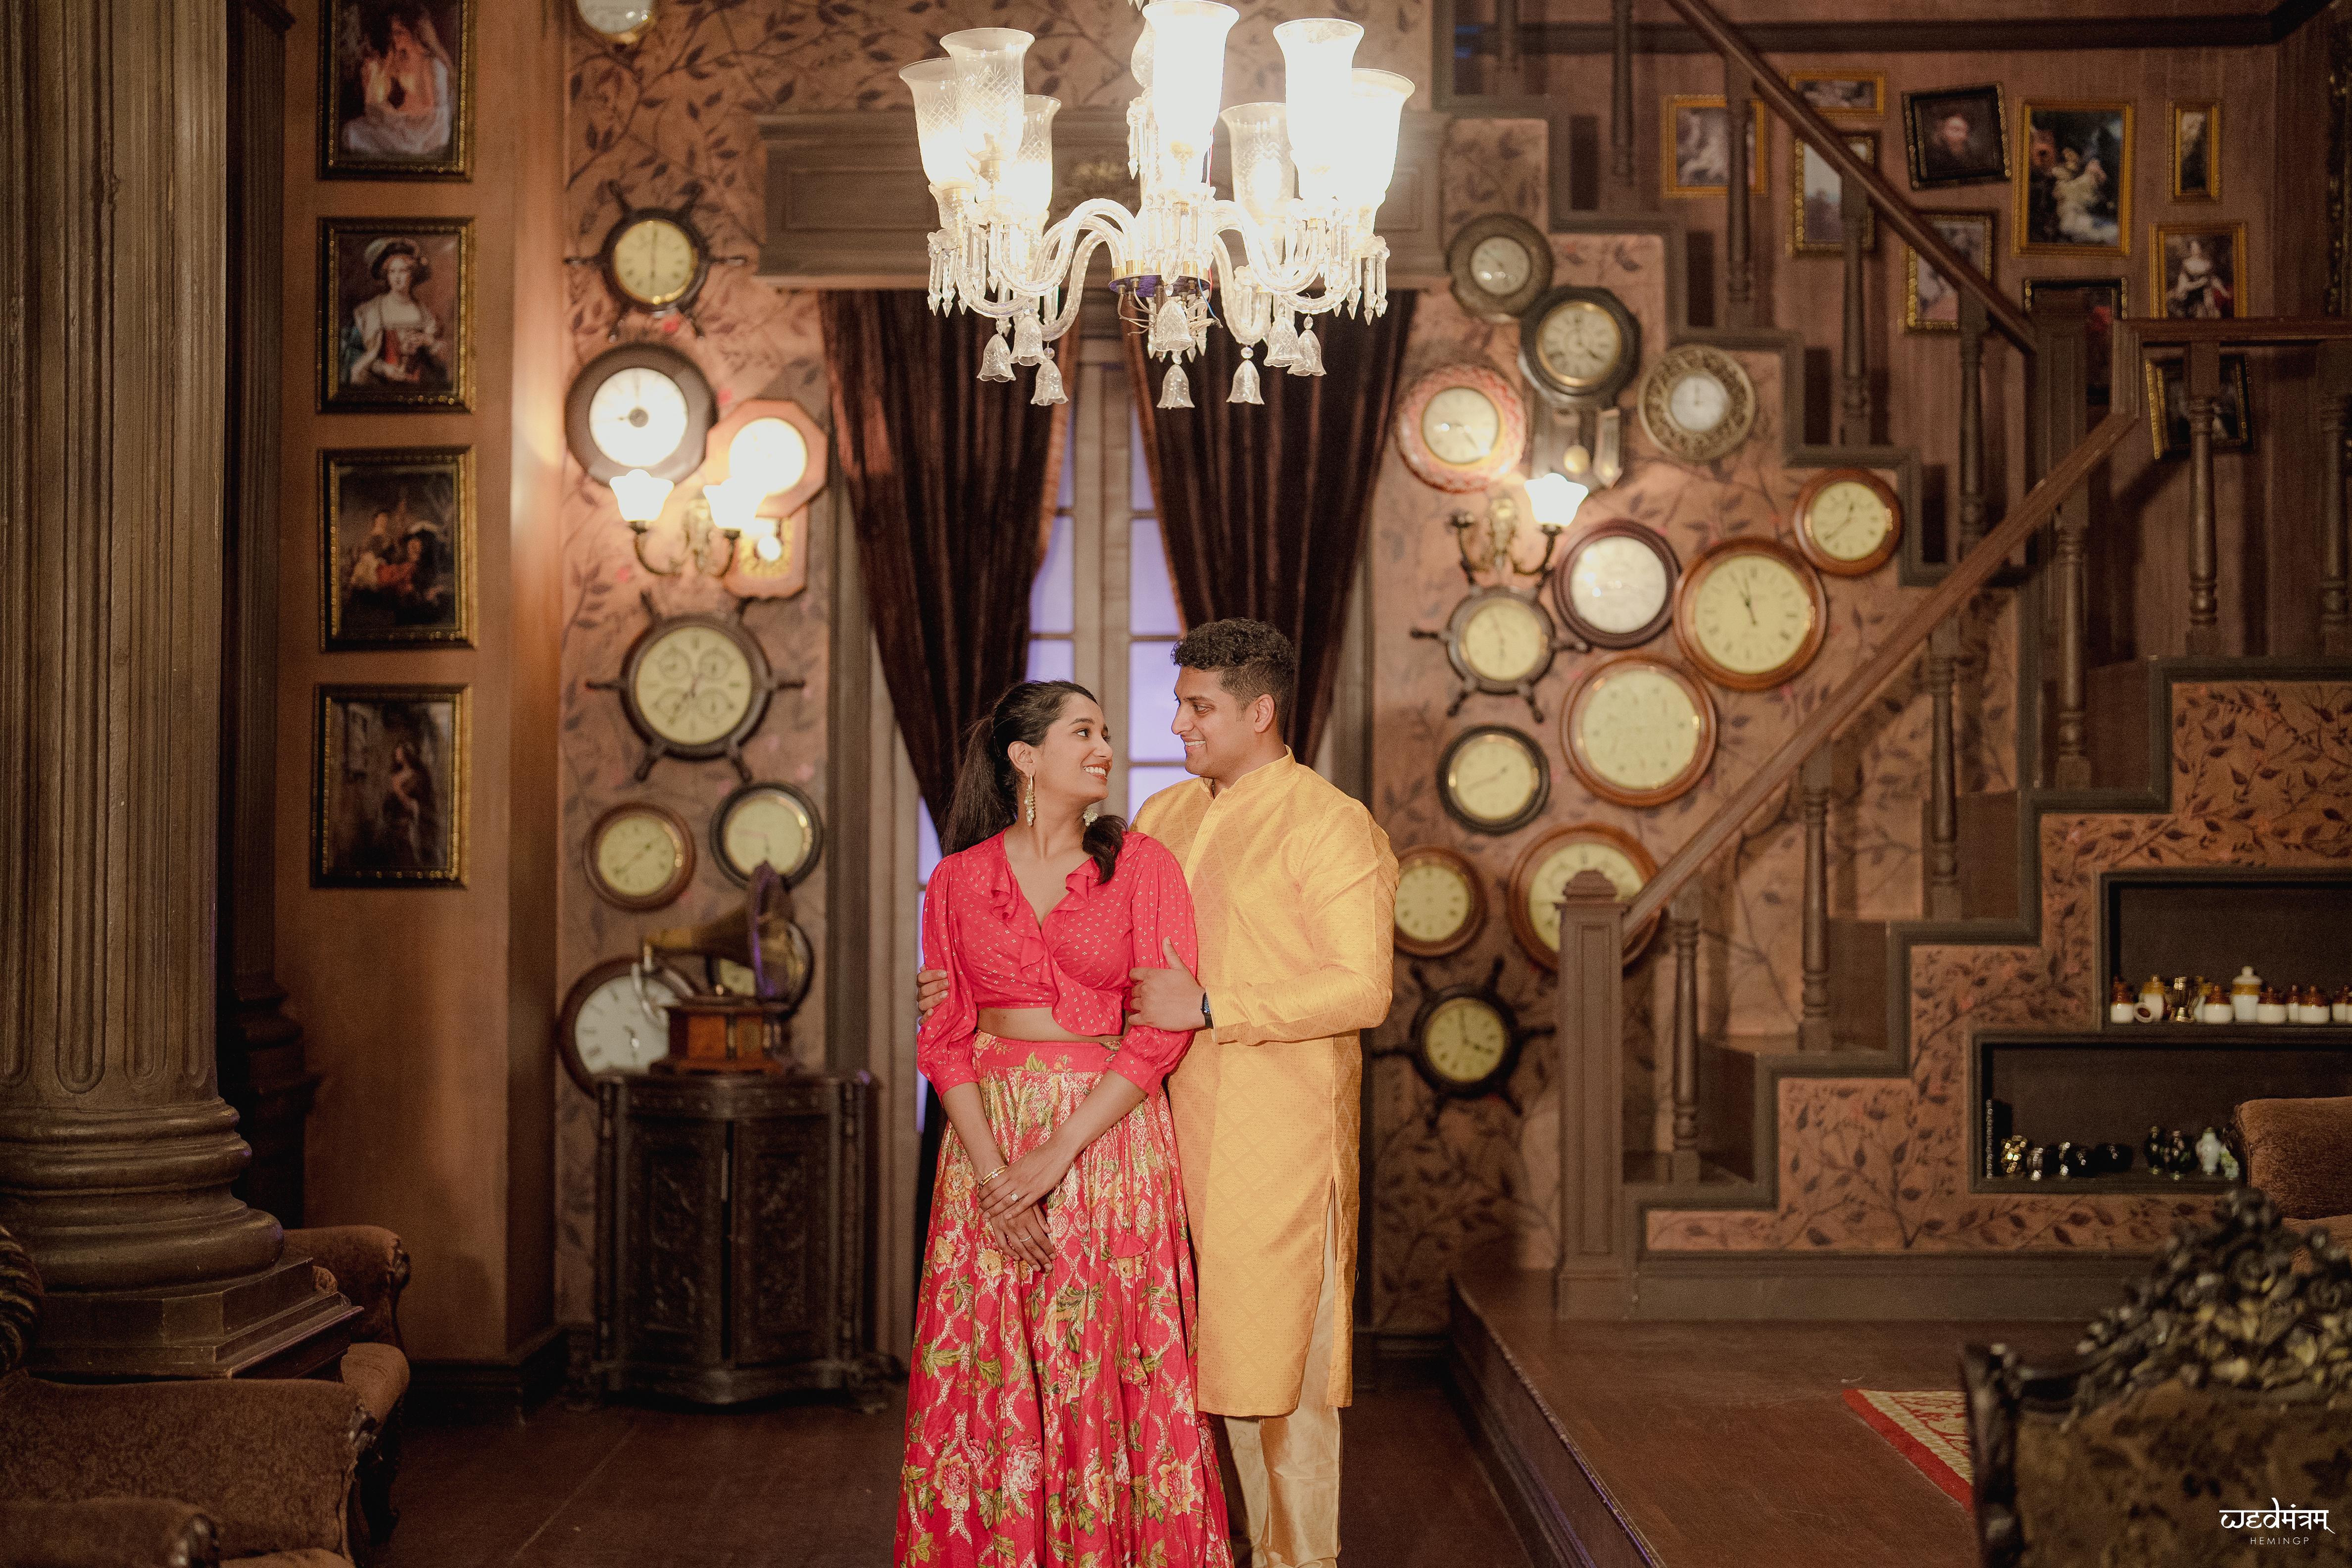 The Wedding Website of Dhruvi Patel and Jay Patel